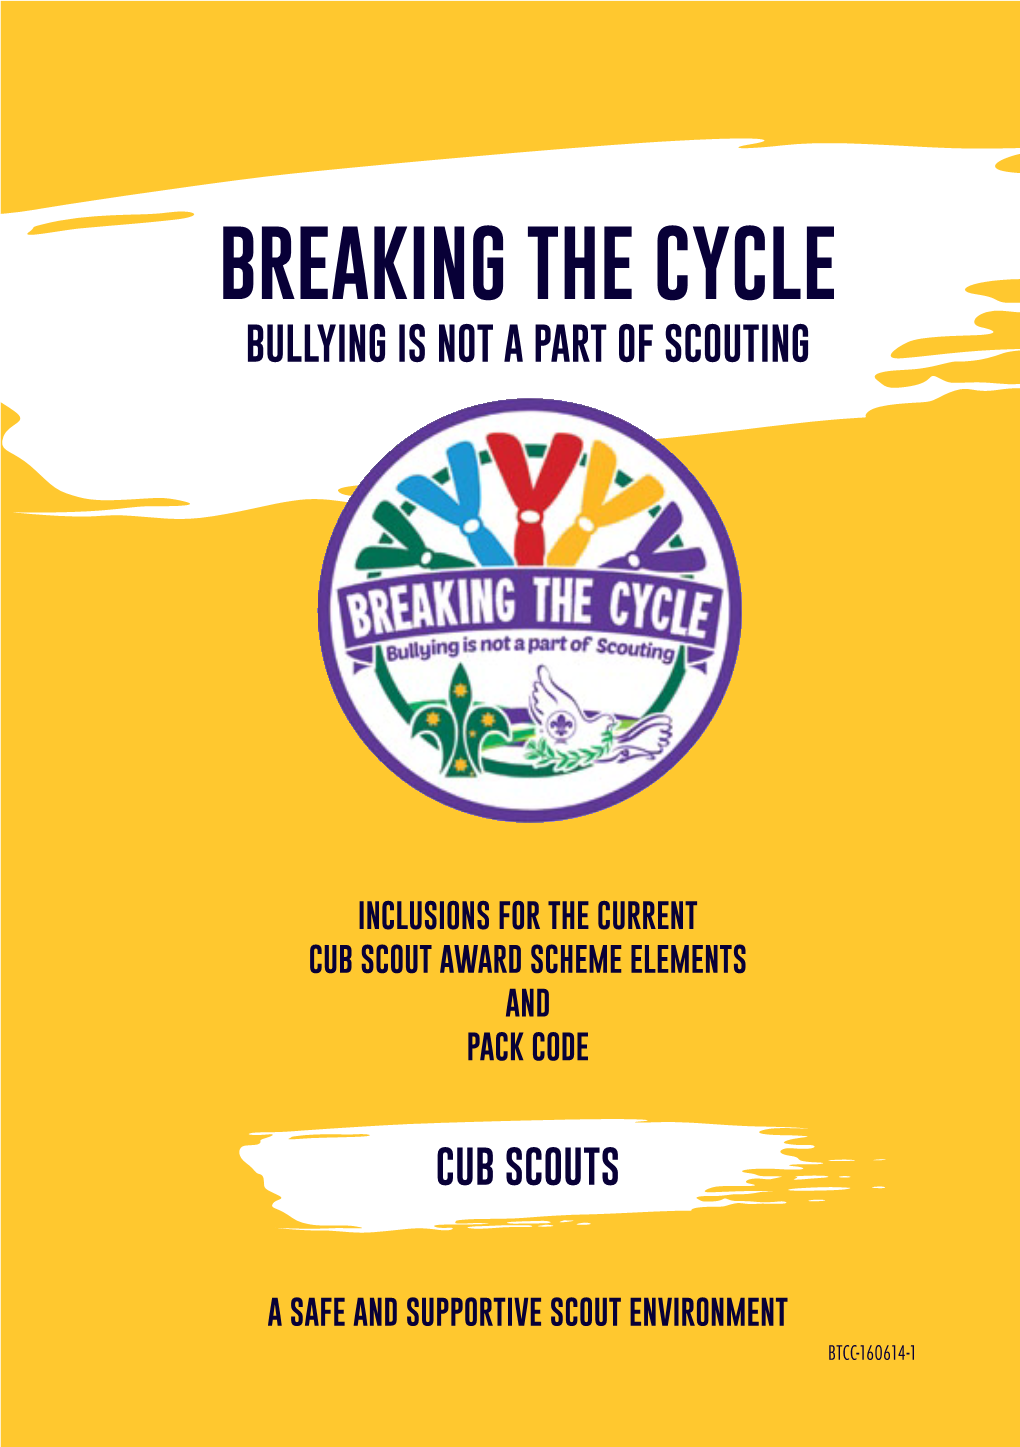 Breaking the Cycle Bullying Is Not a Part of Scouting